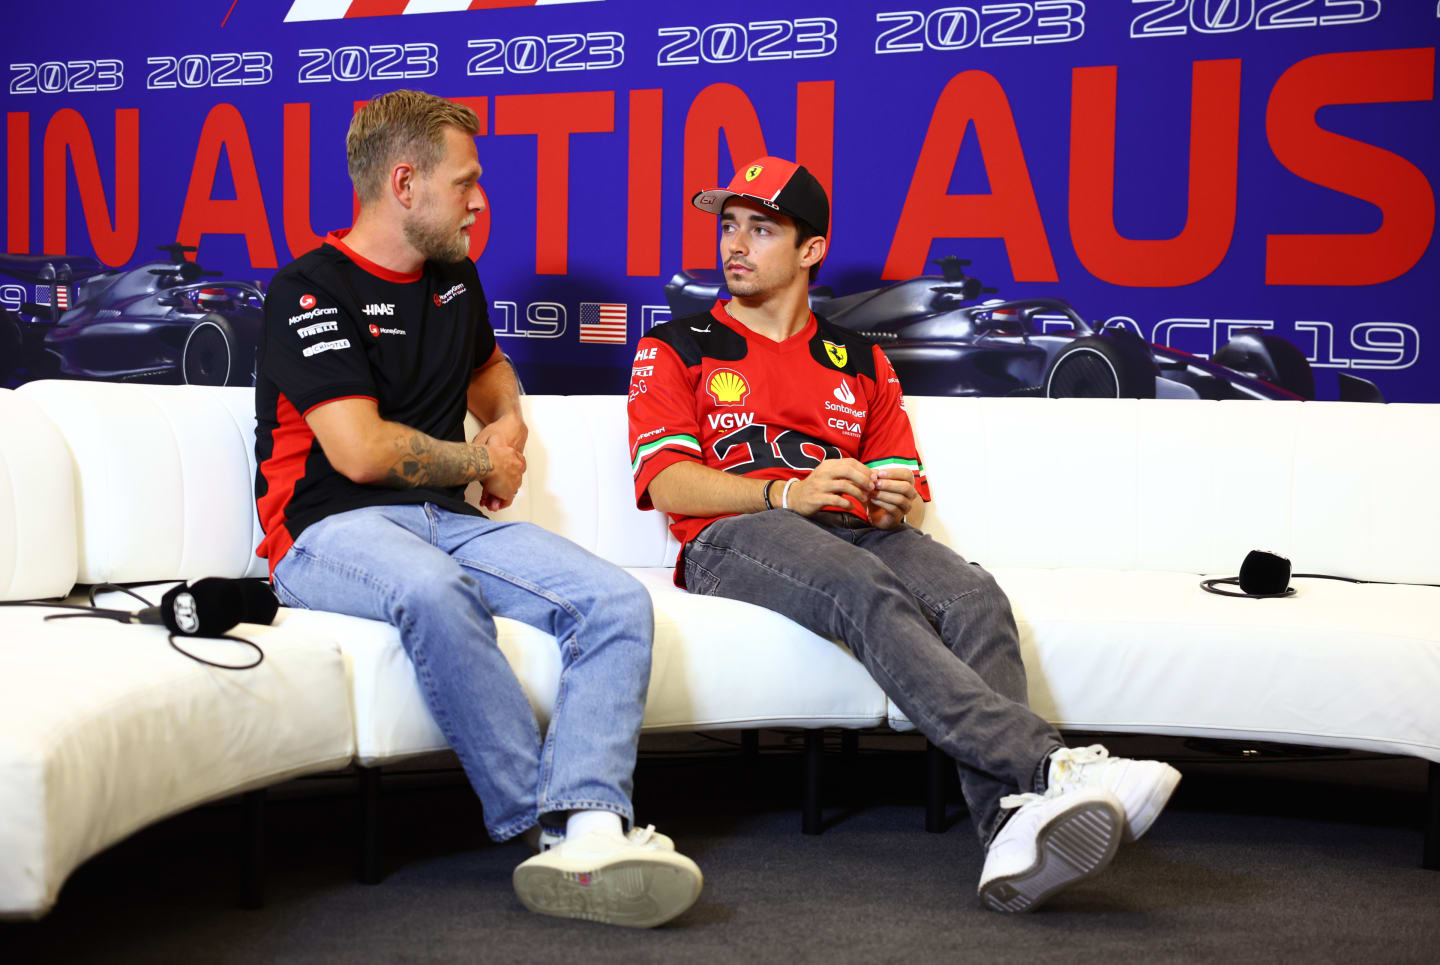 AUSTIN, TEXAS - OCTOBER 19: Kevin Magnussen of Denmark and Haas F1 and Charles Leclerc of Monaco and Ferrari talk in the Drivers Press Conference during previews ahead of the F1 Grand Prix of United States at Circuit of The Americas on October 19, 2023 in Austin, Texas. (Photo by Dan Istitene/Getty Images)